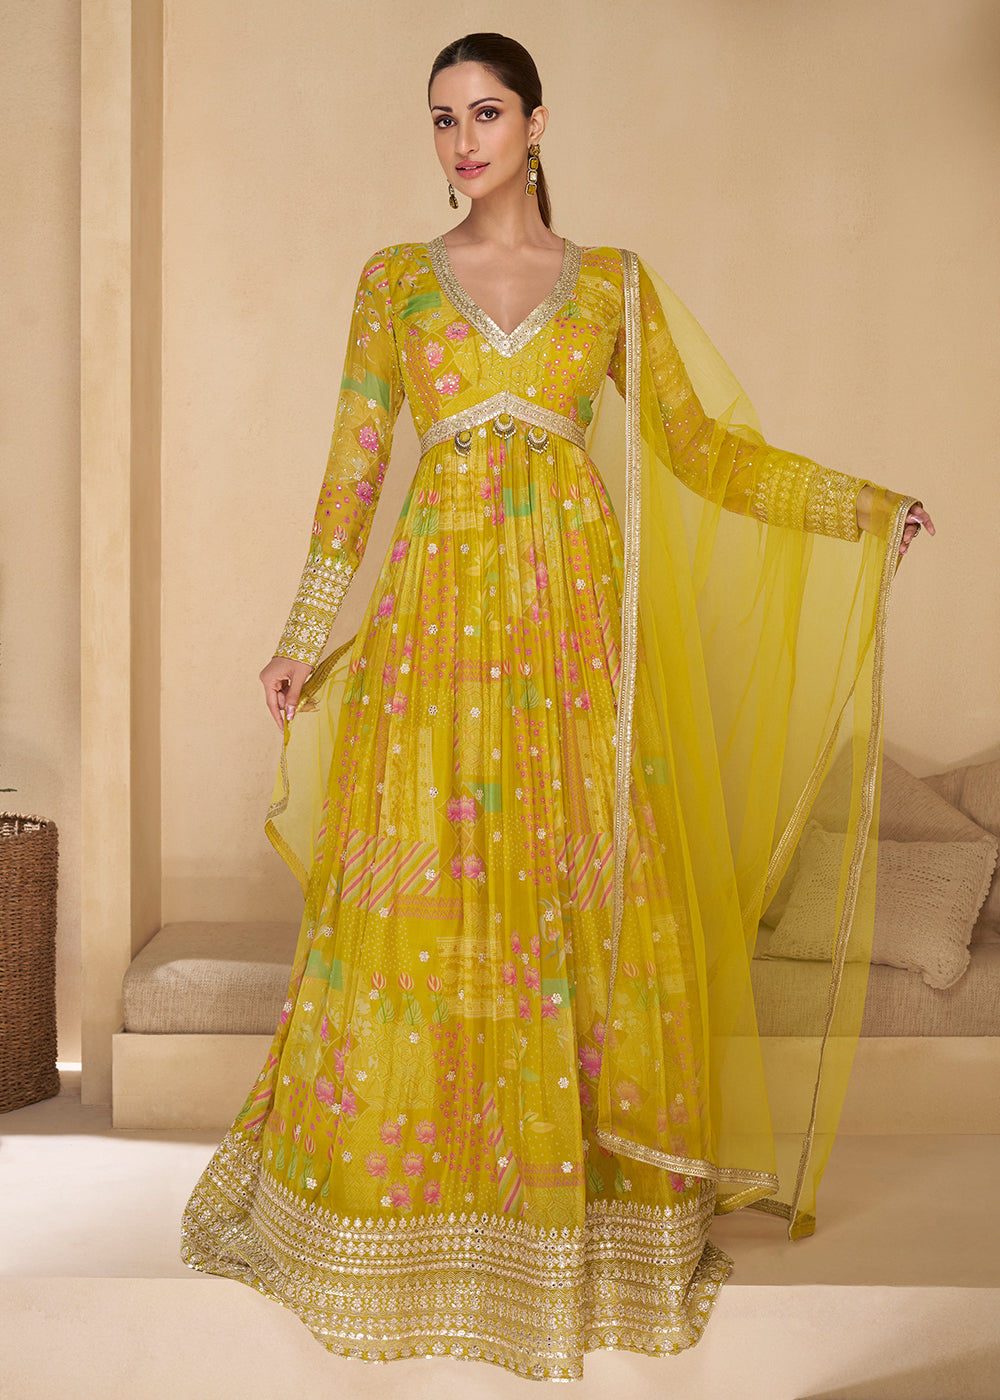 Buy Now Sequins Work Embroidered Yellow Wedding Anarkali Gown Online in USA, UK, Australia, Canada & Worldwide at Empress Clothing.